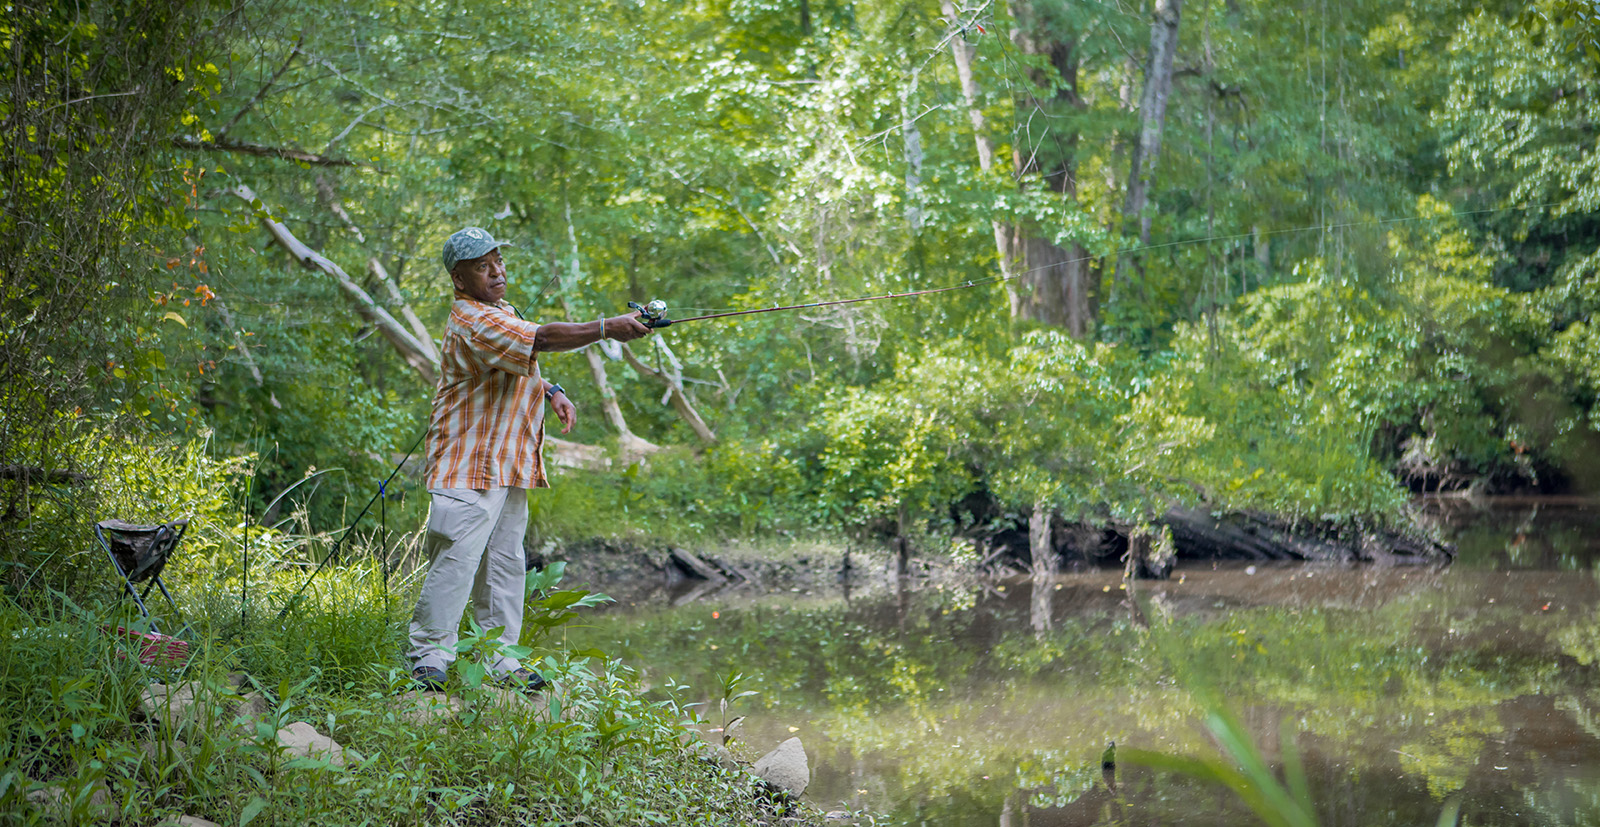 A photo of a man at the edge of a pond, casting a rod and reel into the water.